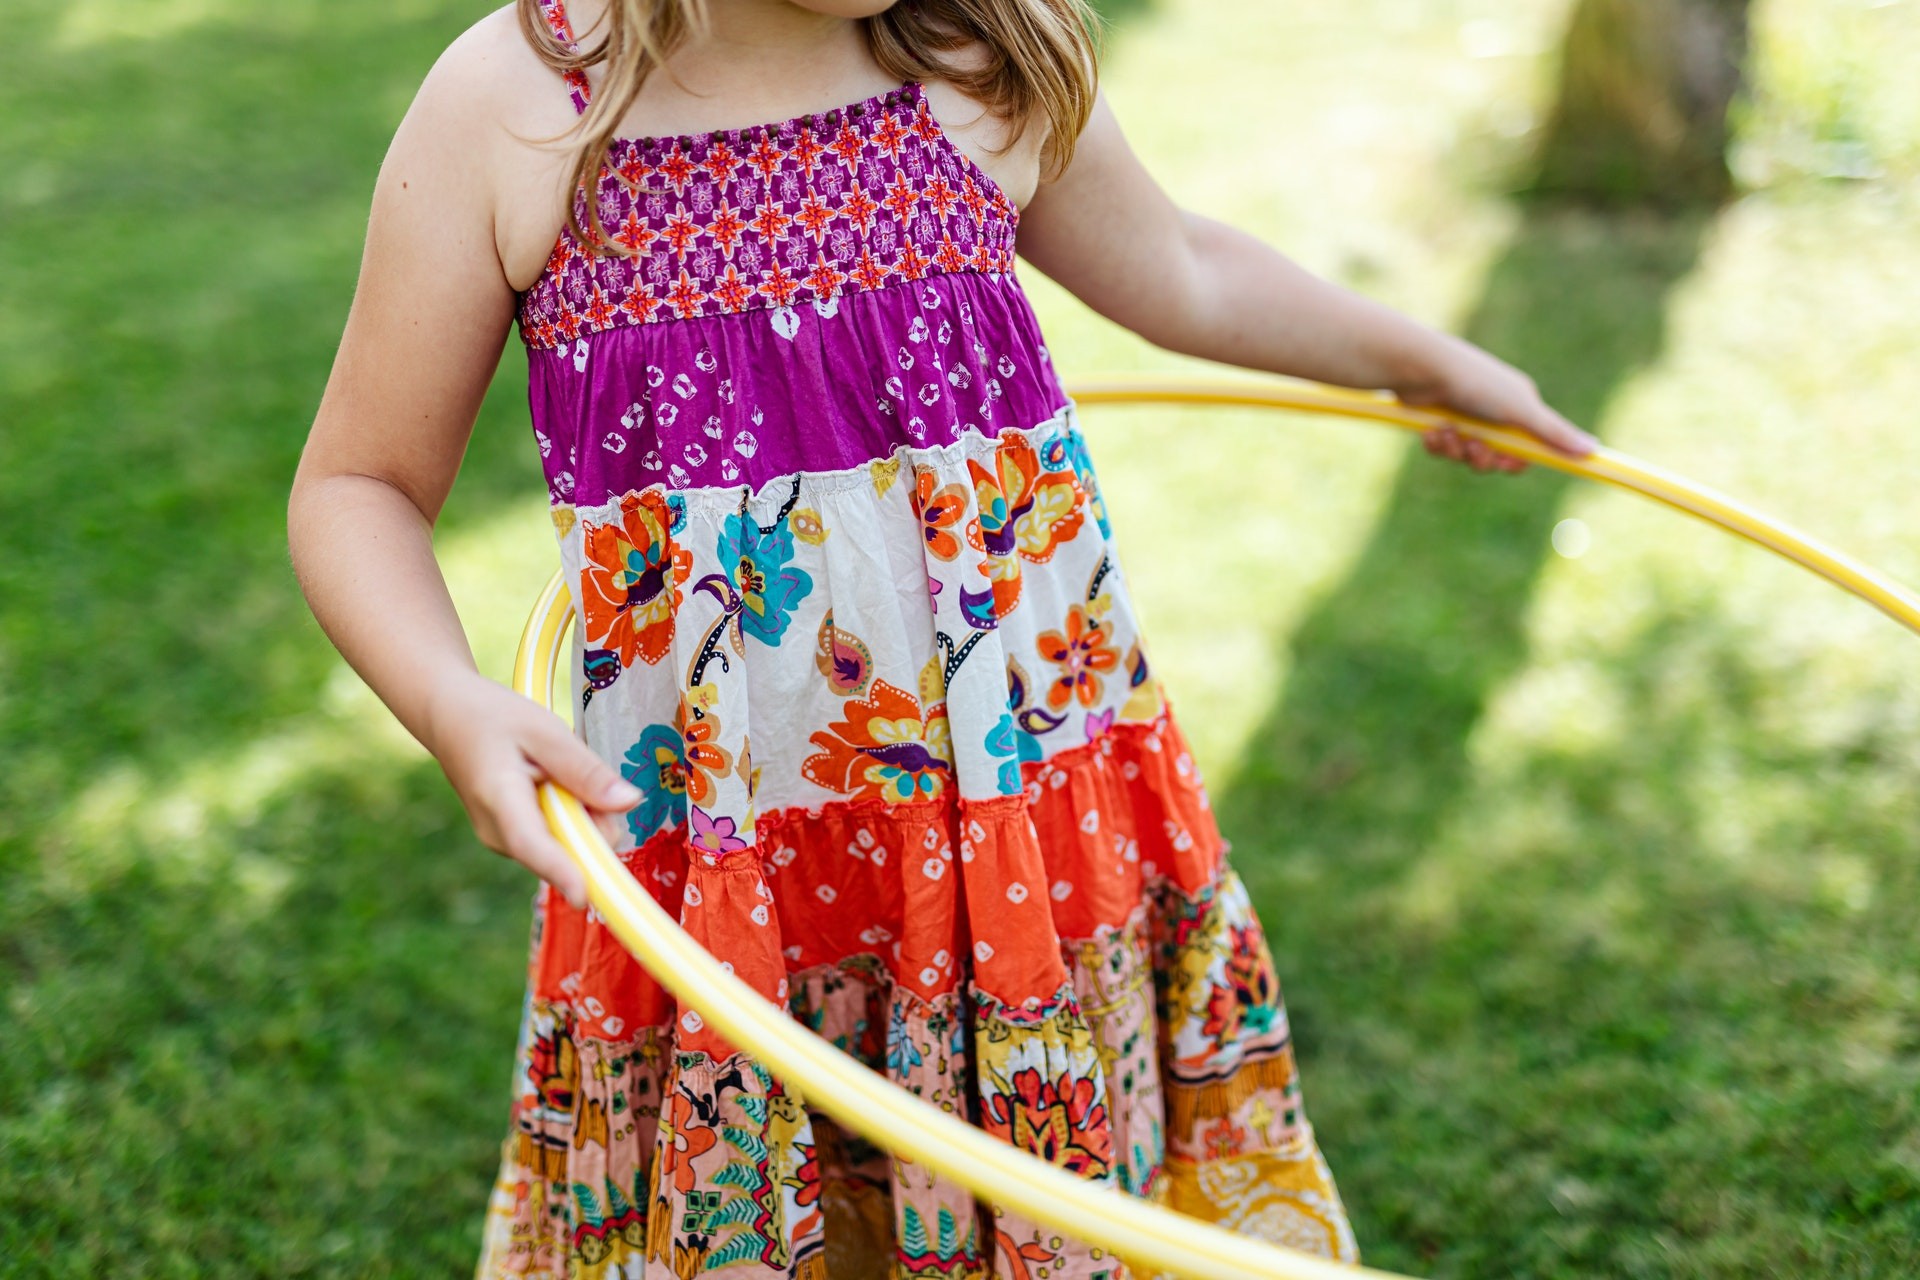 A young student plays with a hula hoop outside.